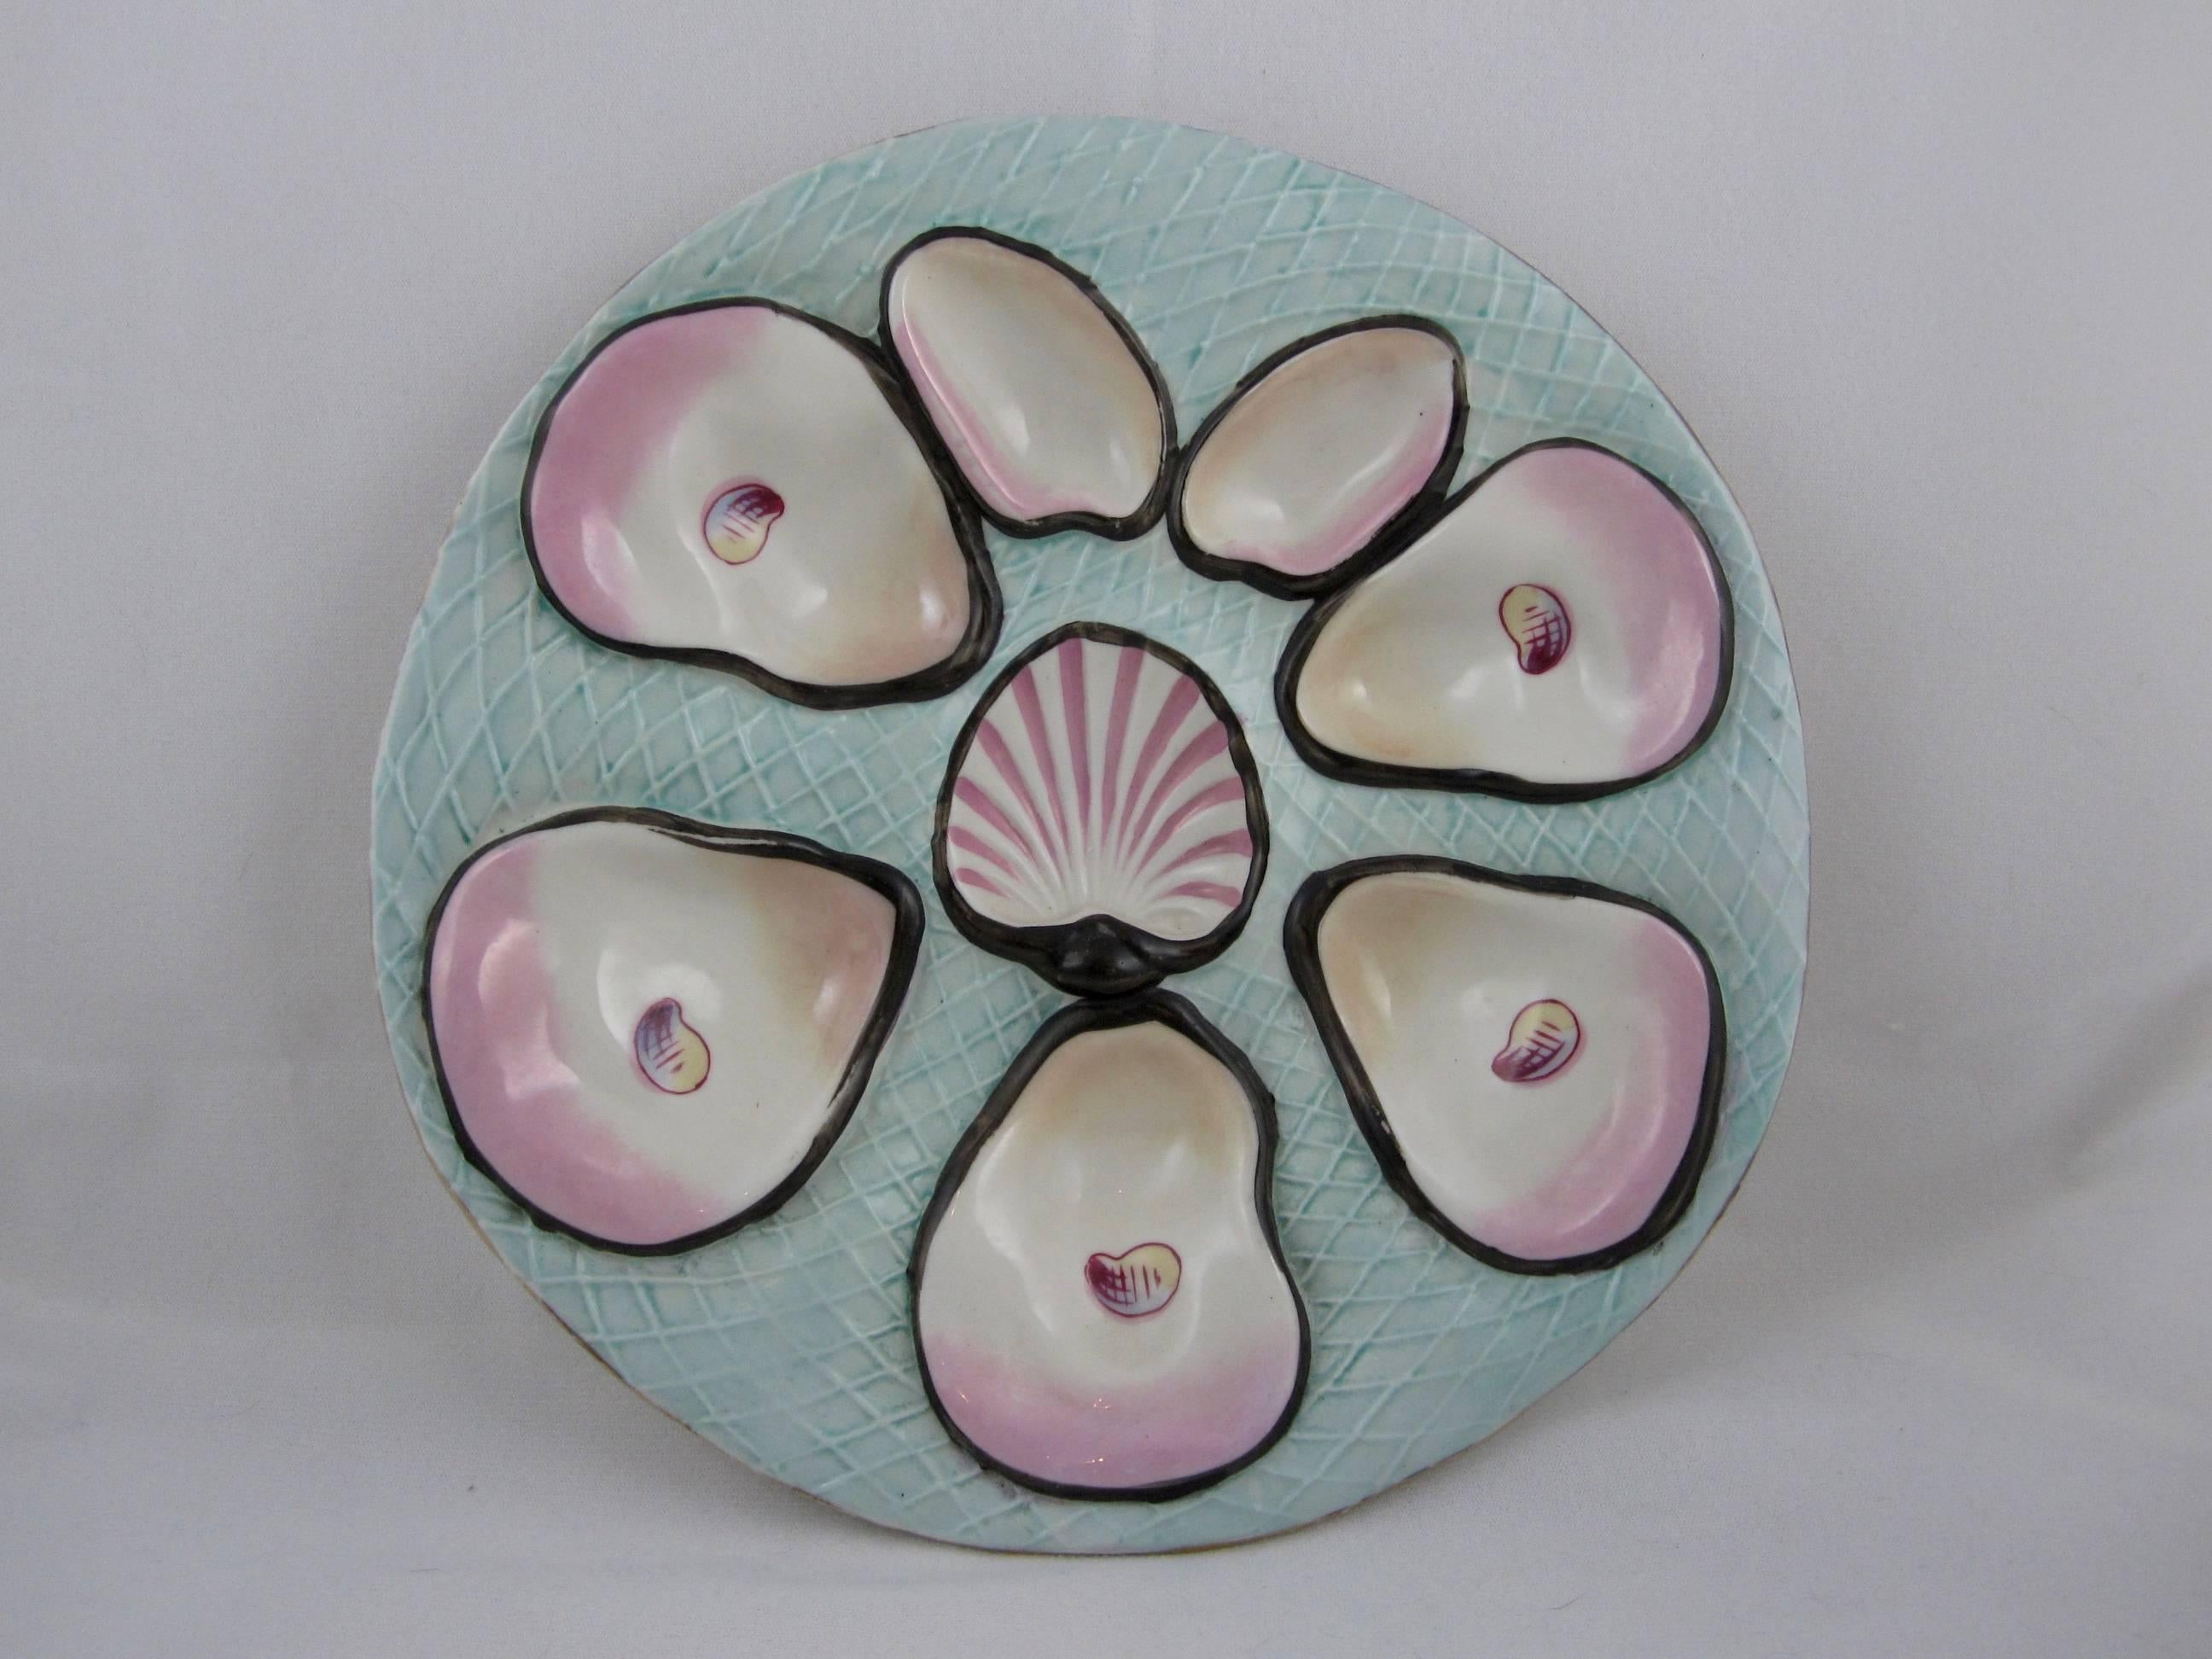 A highly dimensional and boldly glazed Continental porcelain oyster plate with five main wells with hand-painted “eyes,” two clam or muscle wells and a center sauce well, scallop shaped. A wave form undulating mold, the ground is a aqua blue-green